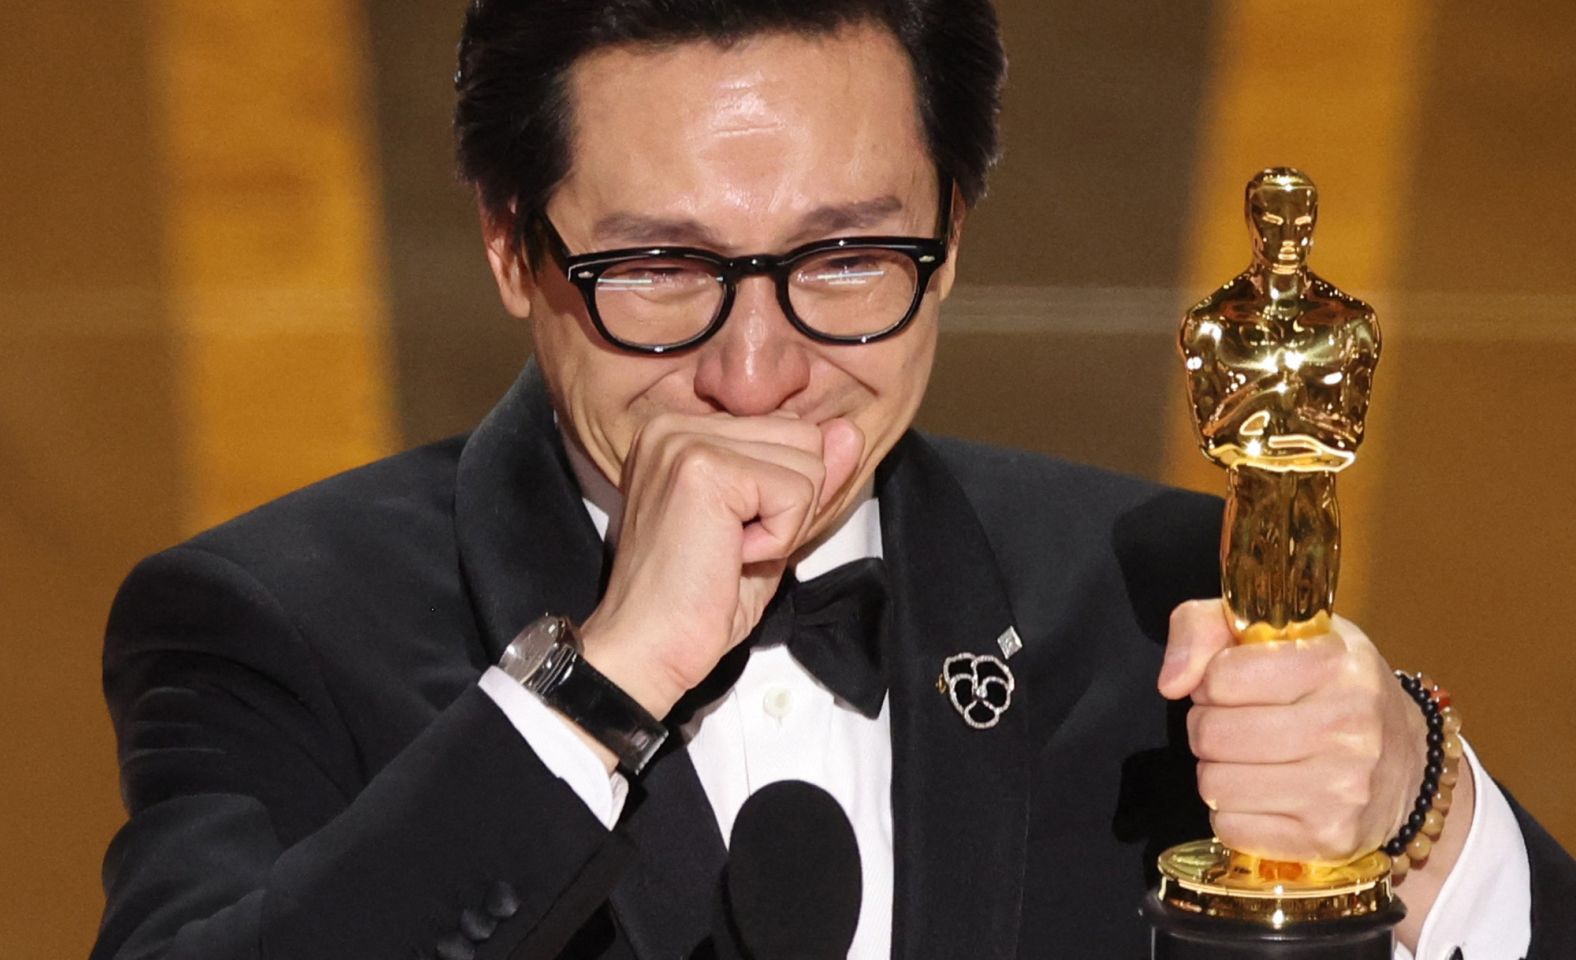 Quan gives a speech after winning the Oscar for best supporting actor. Quan, who won for his role in "Everything Everywhere All at Once," addressed his 84-year-old mother in his <a href="index.php?page=&url=https%3A%2F%2Fwww.cnn.com%2Fentertainment%2Flive-news%2Foscars-2023%2Fh_01ec689e05123e42b84b80b06abc221c" target="_blank">tearful speech</a>: "Mom, I just won an Oscar!"